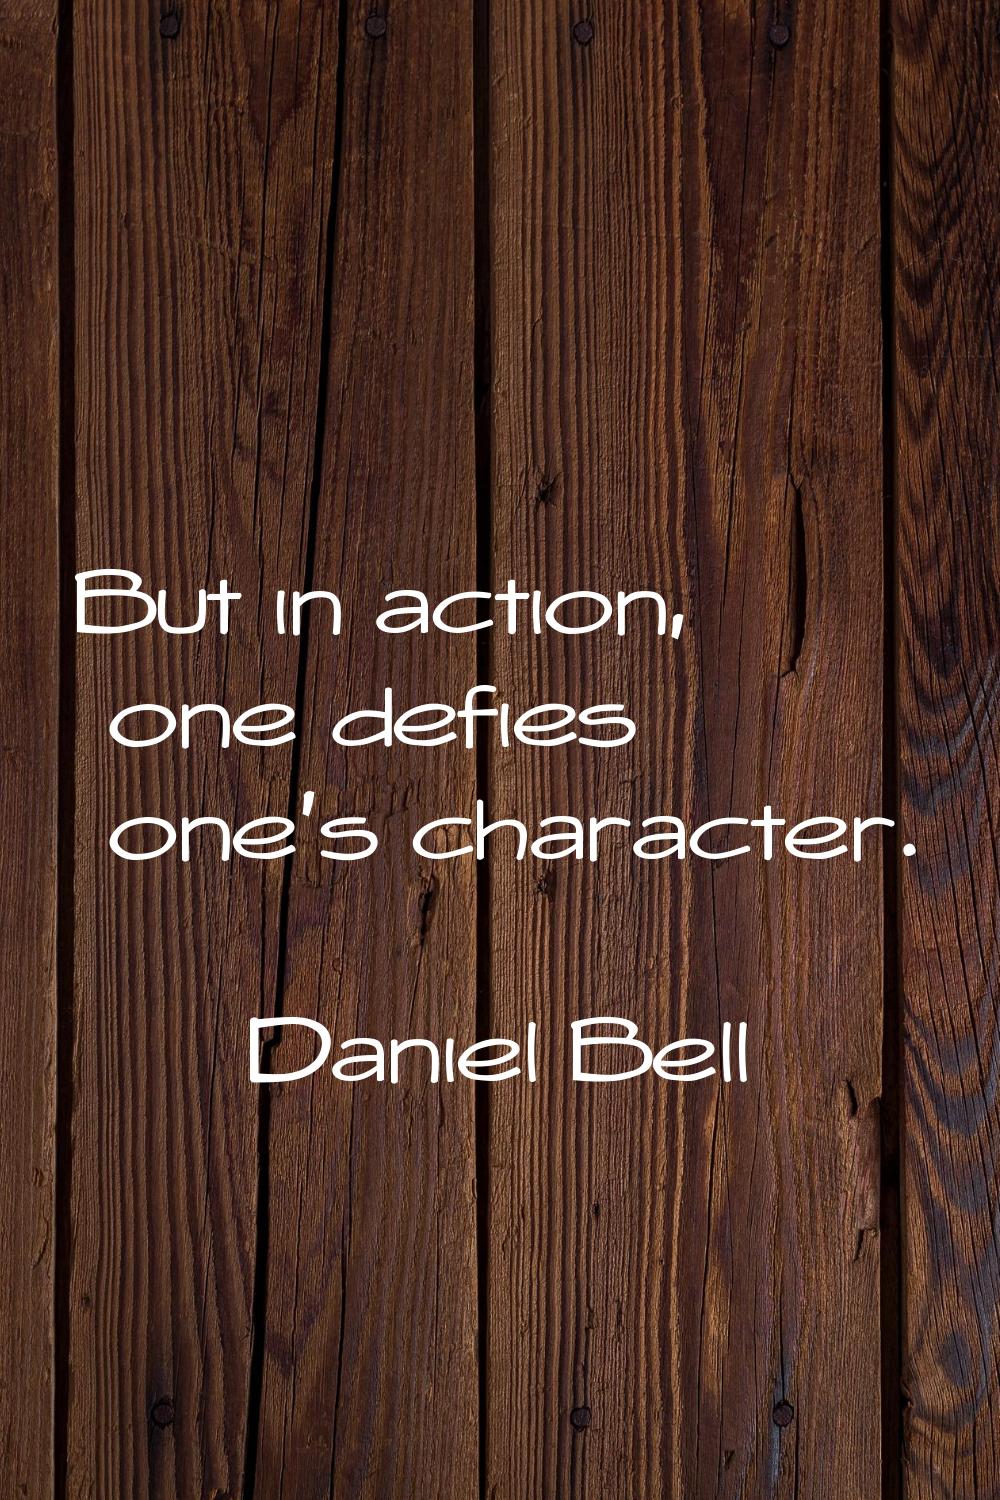 But in action, one defies one's character.